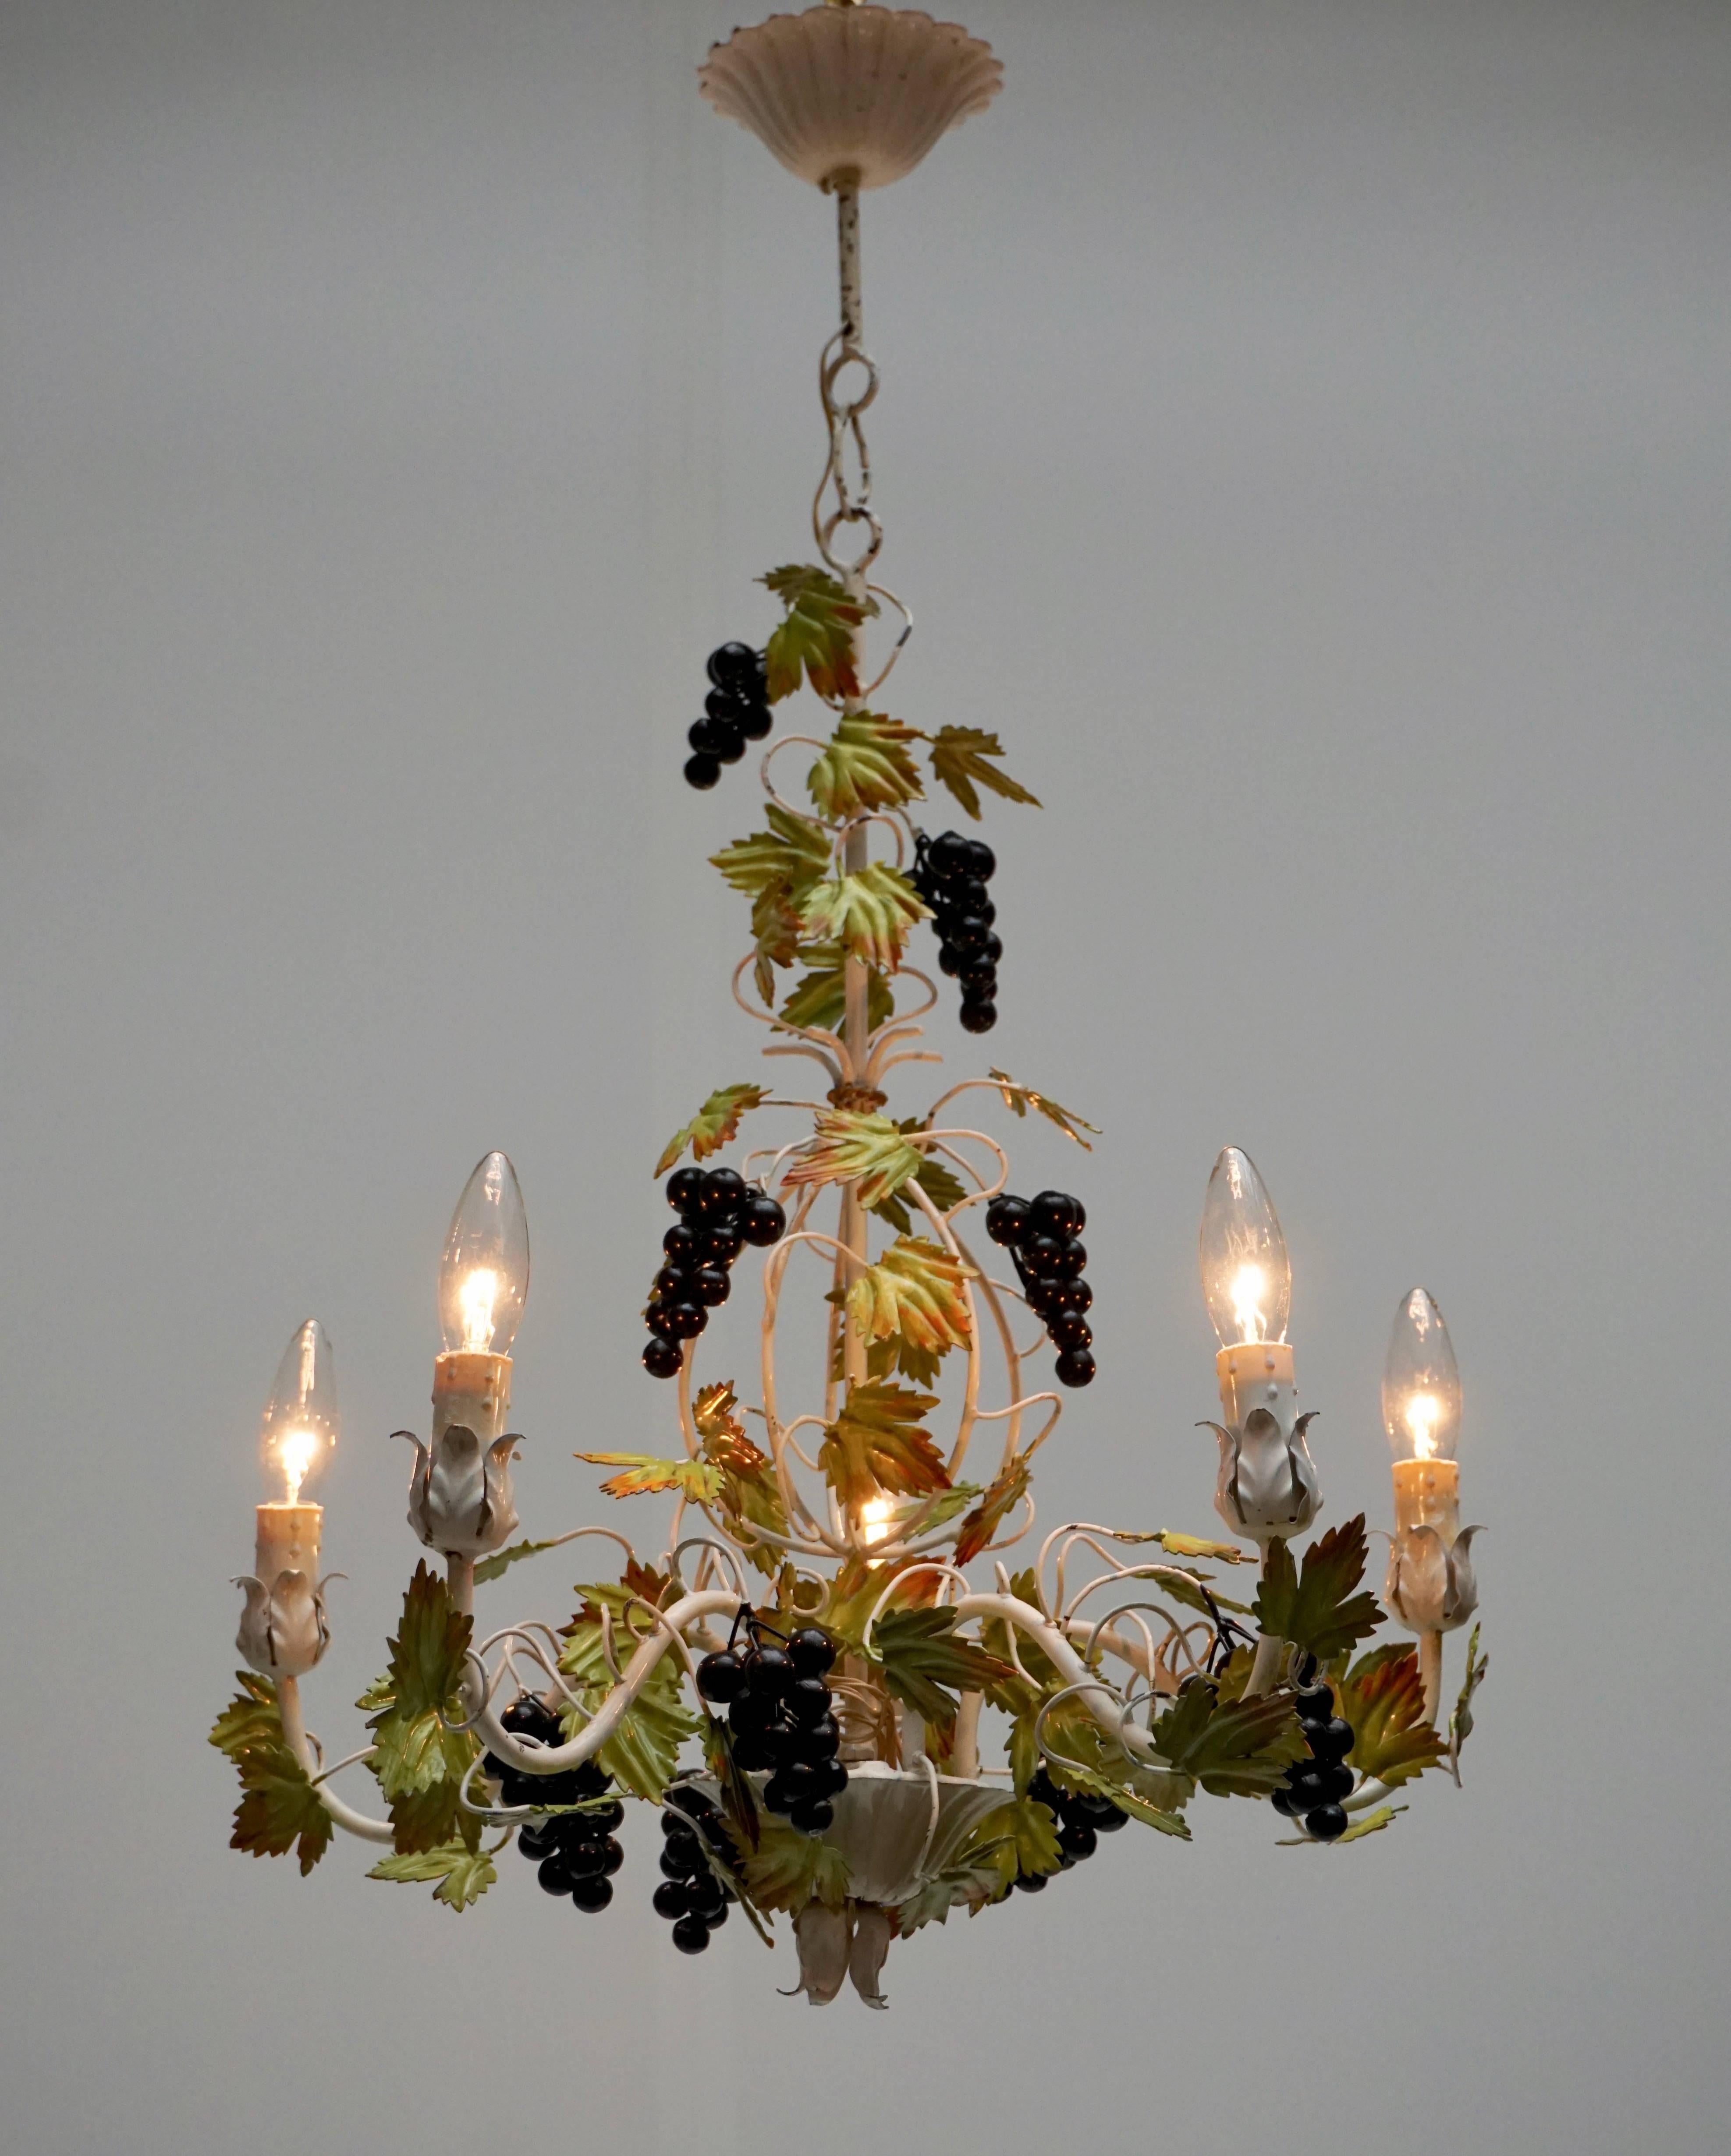 Metal painted chandelier with bunches of grapes.
Diameter: 50 cm.
Height fixture: 55 cm.
Total height with the chain: 75 cm.
Five E14 bulbs.